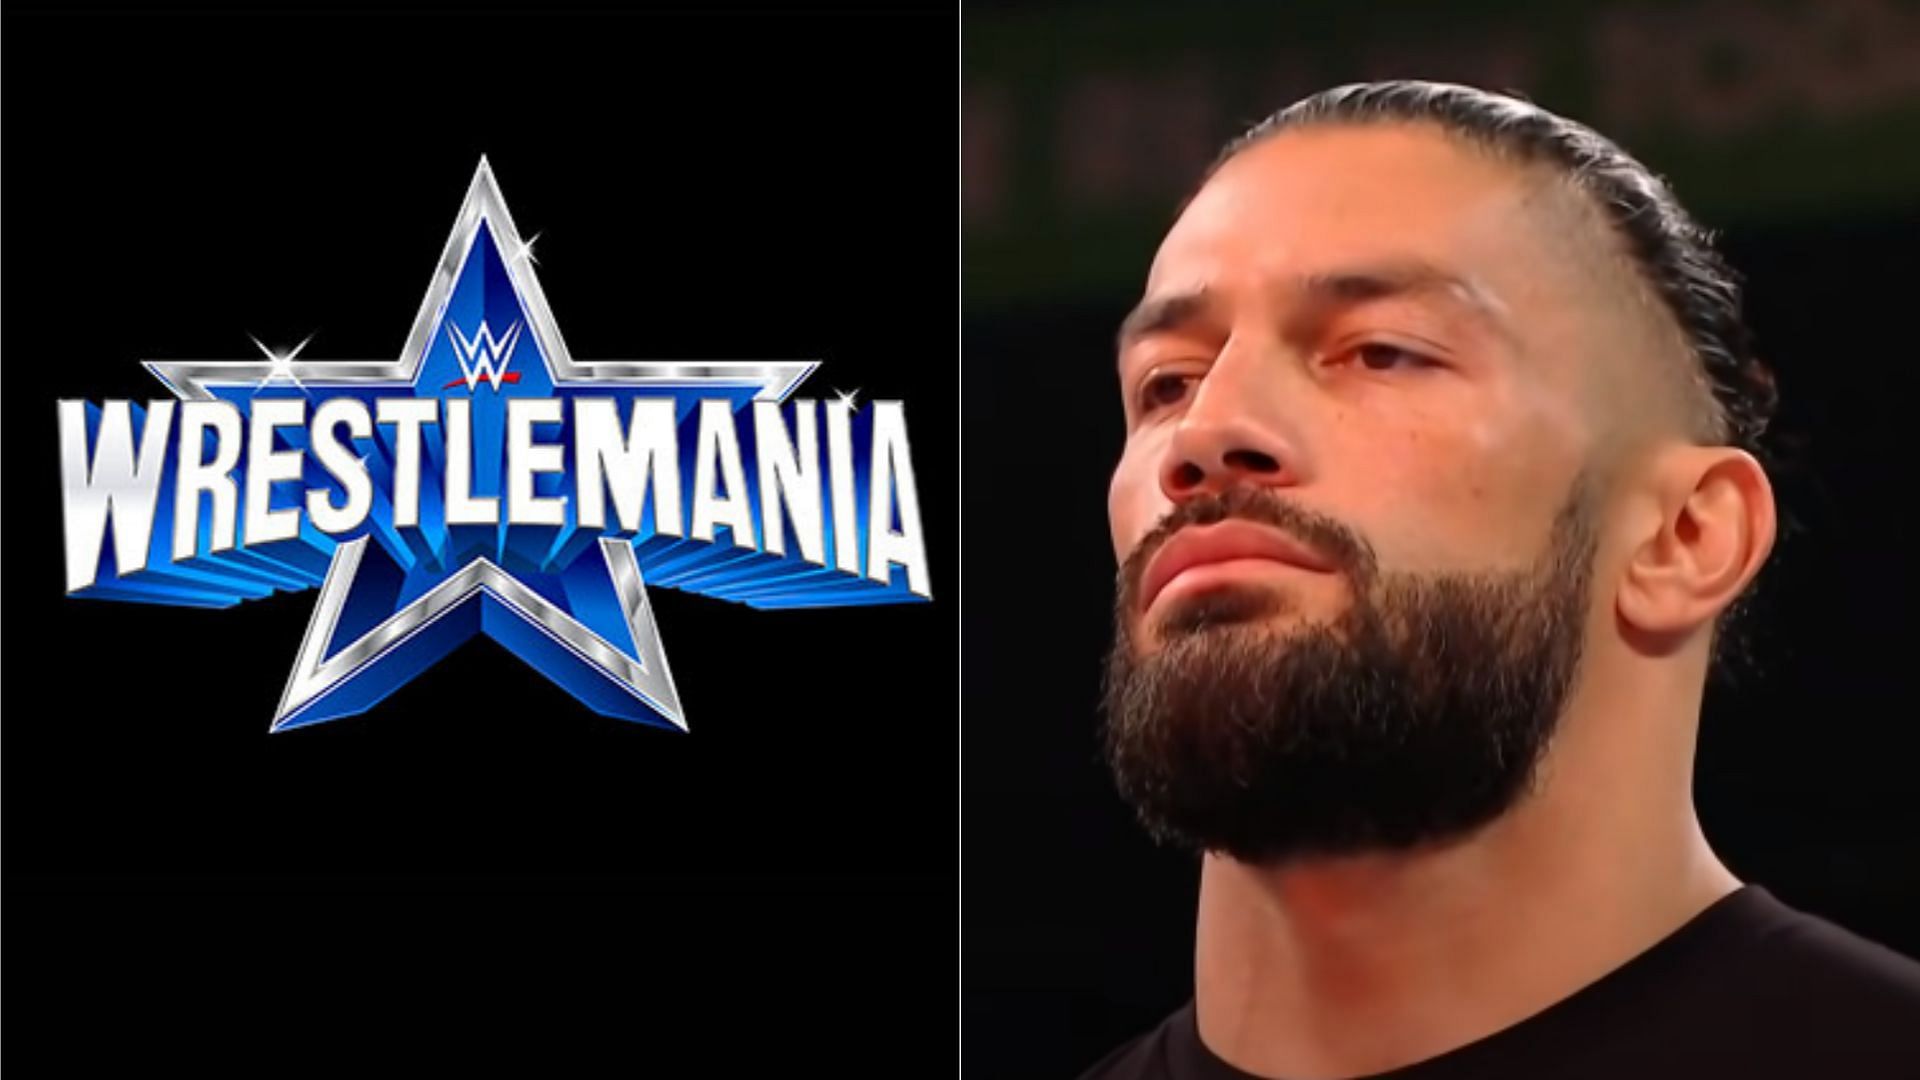 Roman Reigns is due to face Brock Lesnar at WrestleMania 38